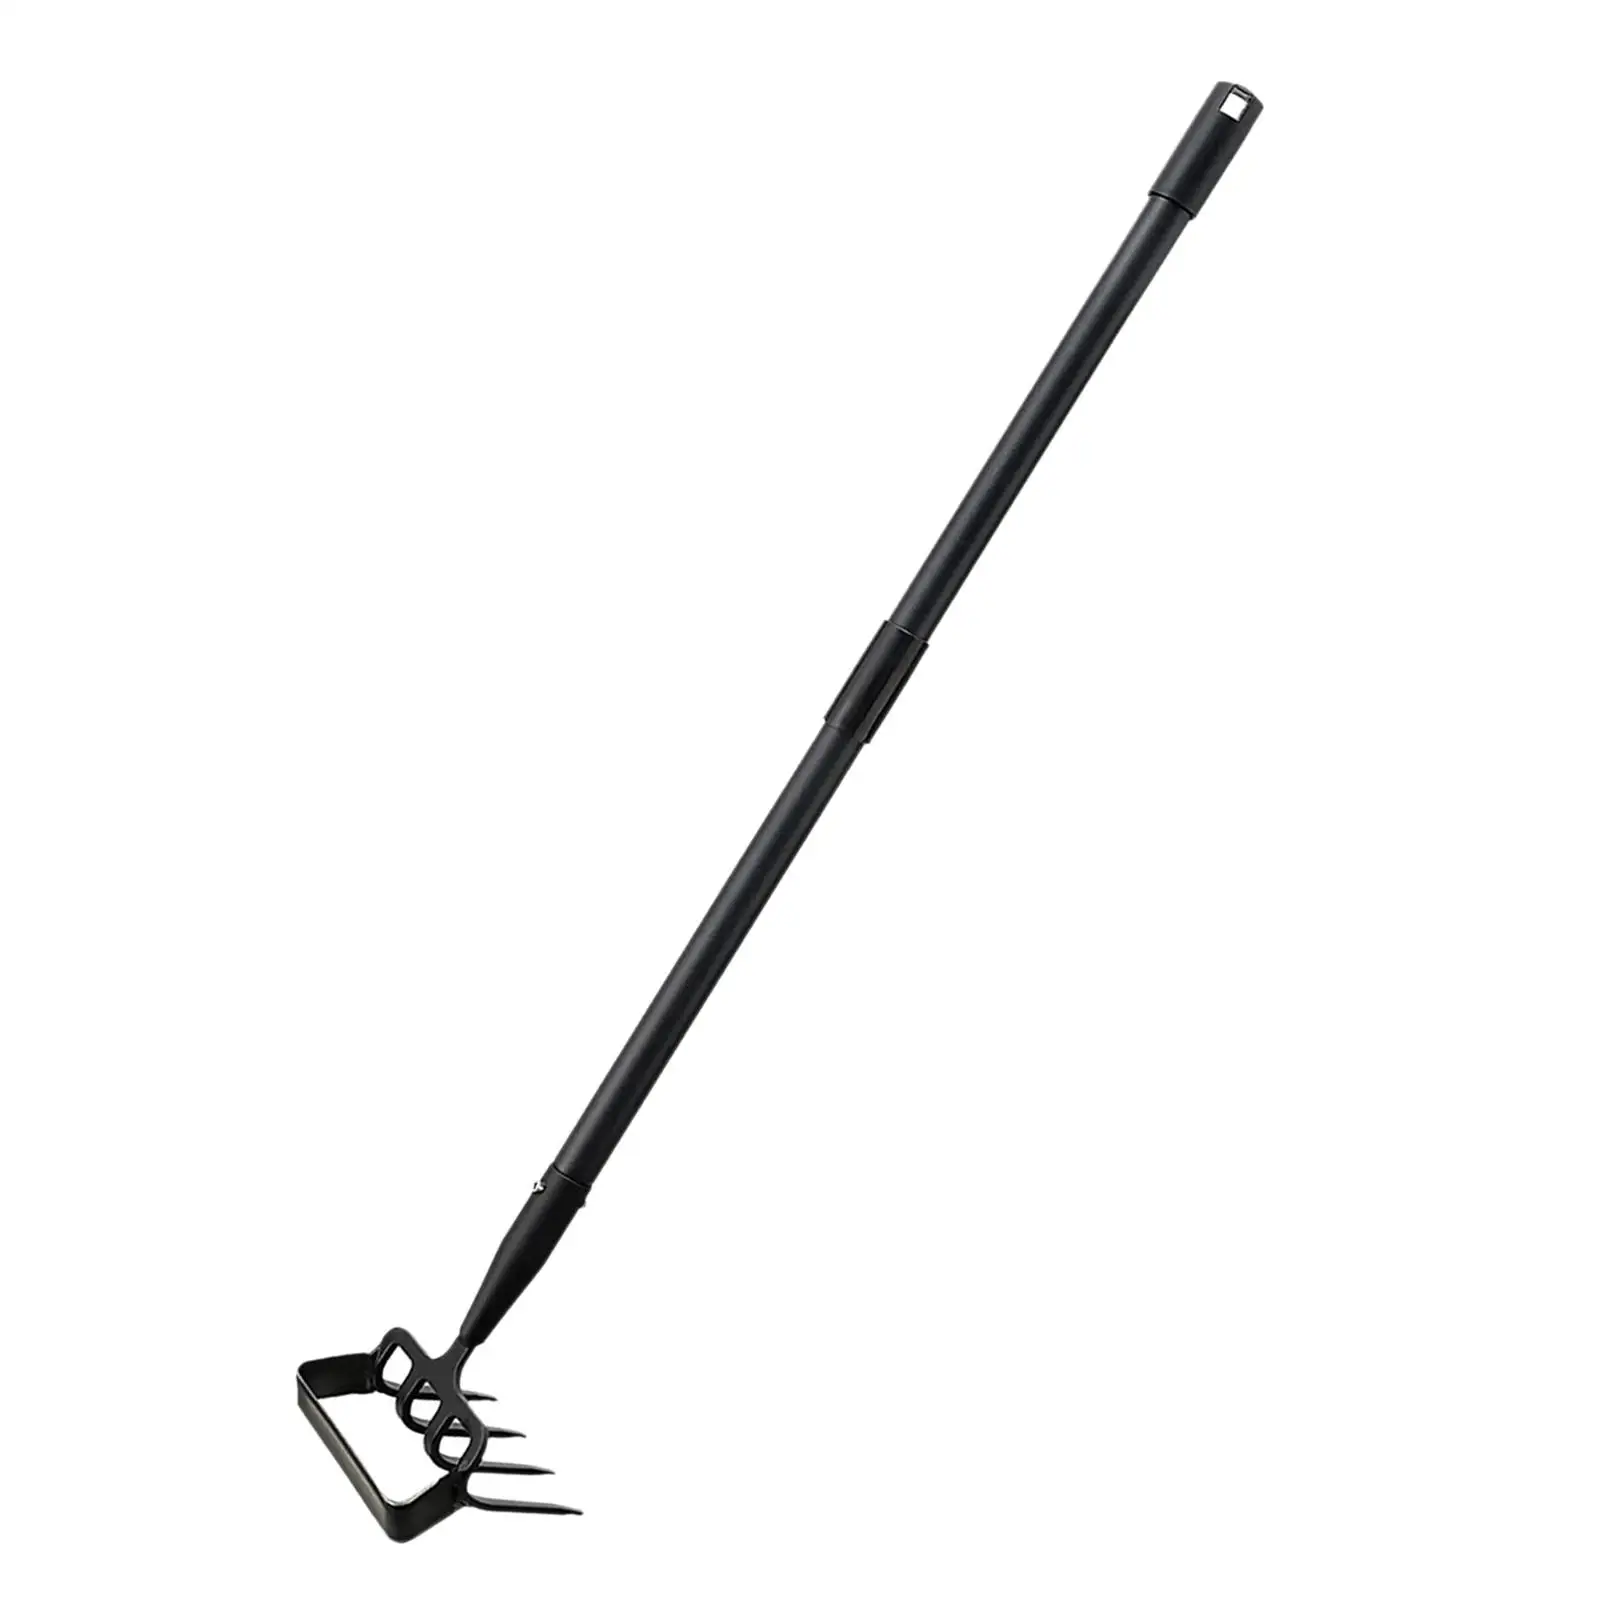 Garden Weeder Hand Tool Dual Purpose Stirrup Hoe and Cultivator Scuffle Loop for Vegetable Planting weeding Men